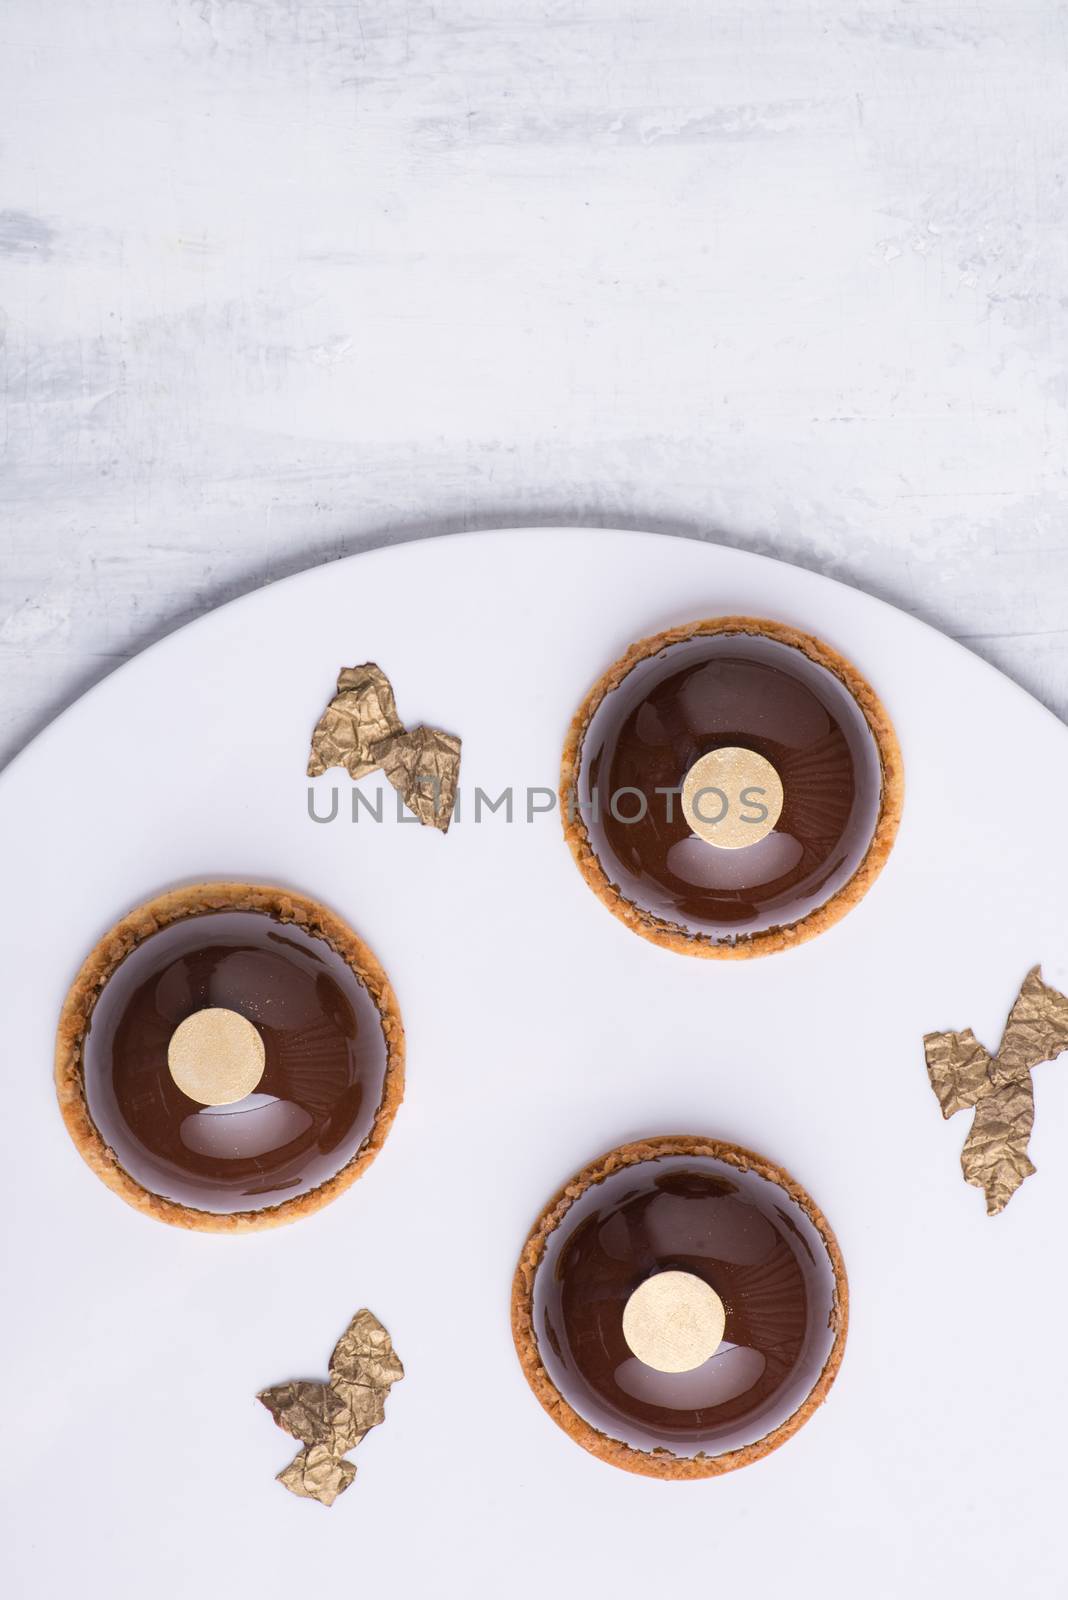 sweets on white background by A_Karim